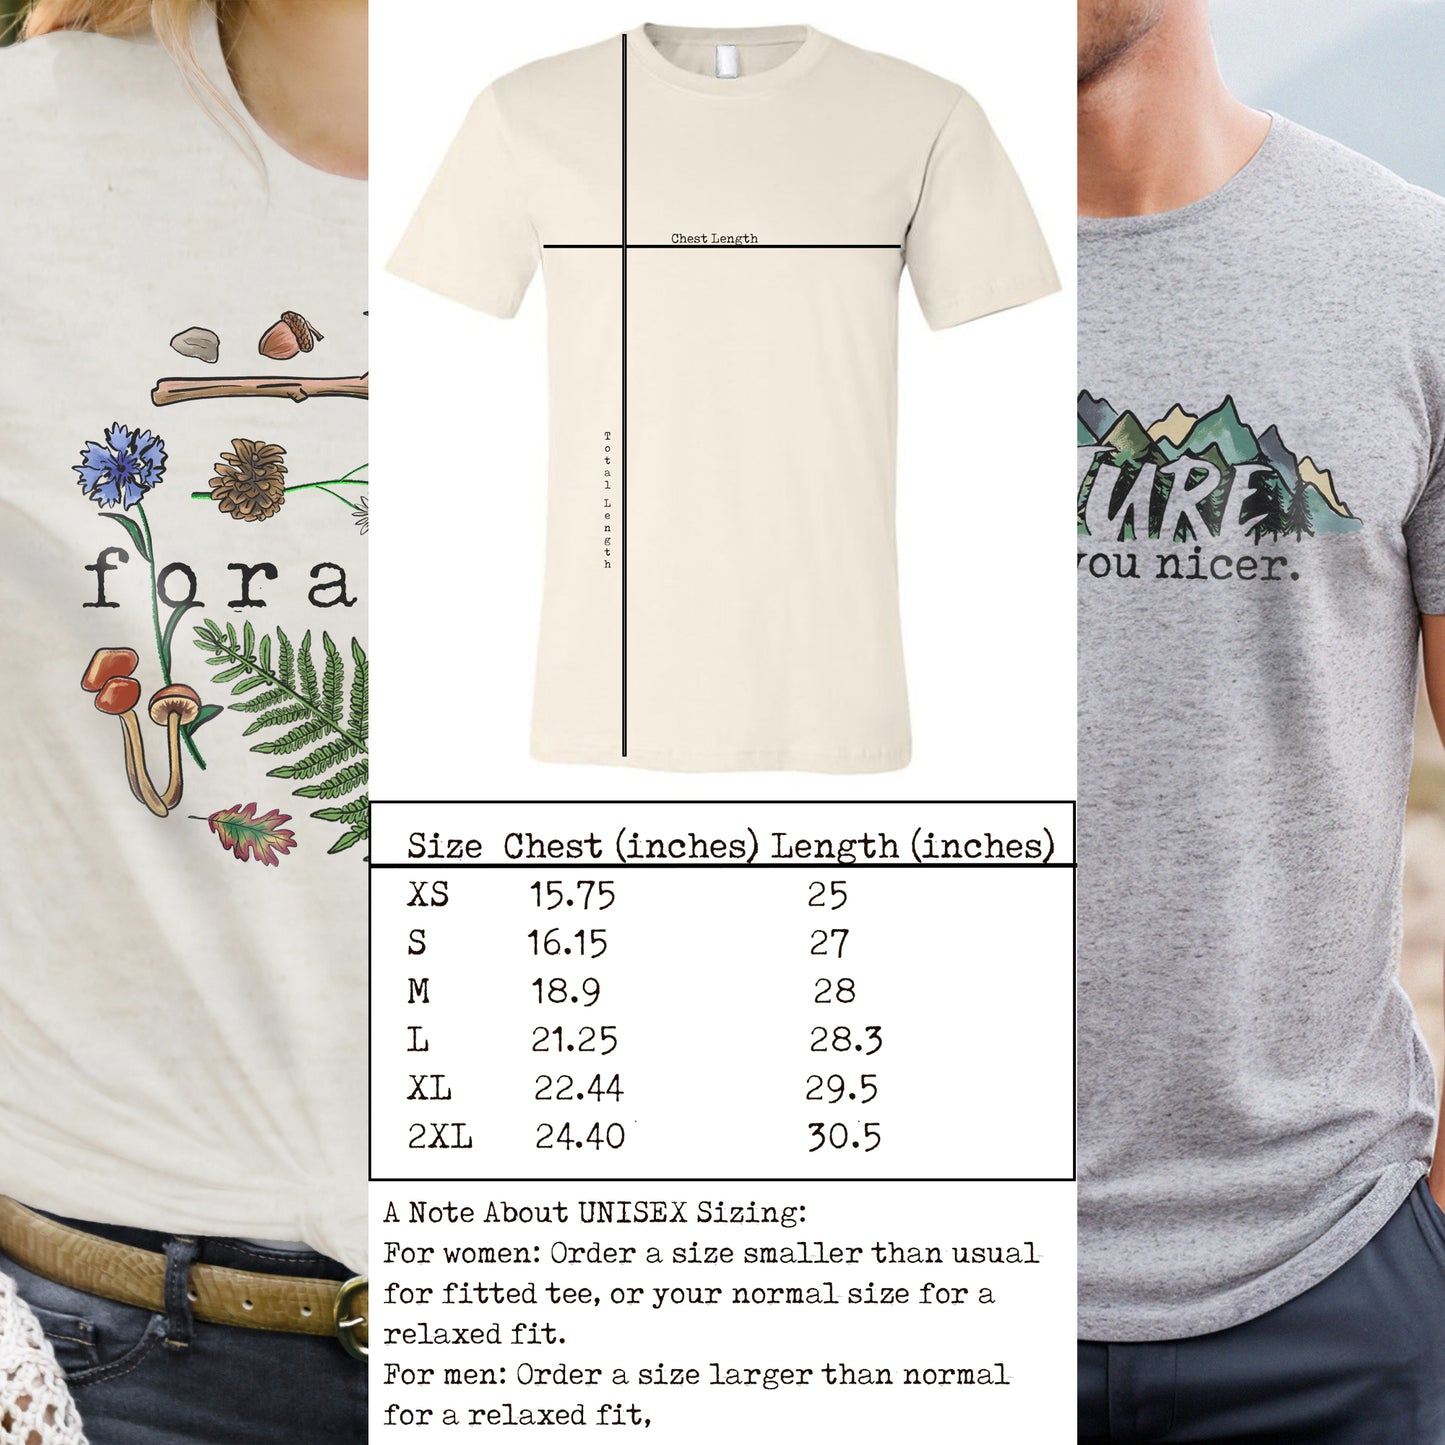 "Forager" Nature Loving Outdoor Enthusiast Design for Adults